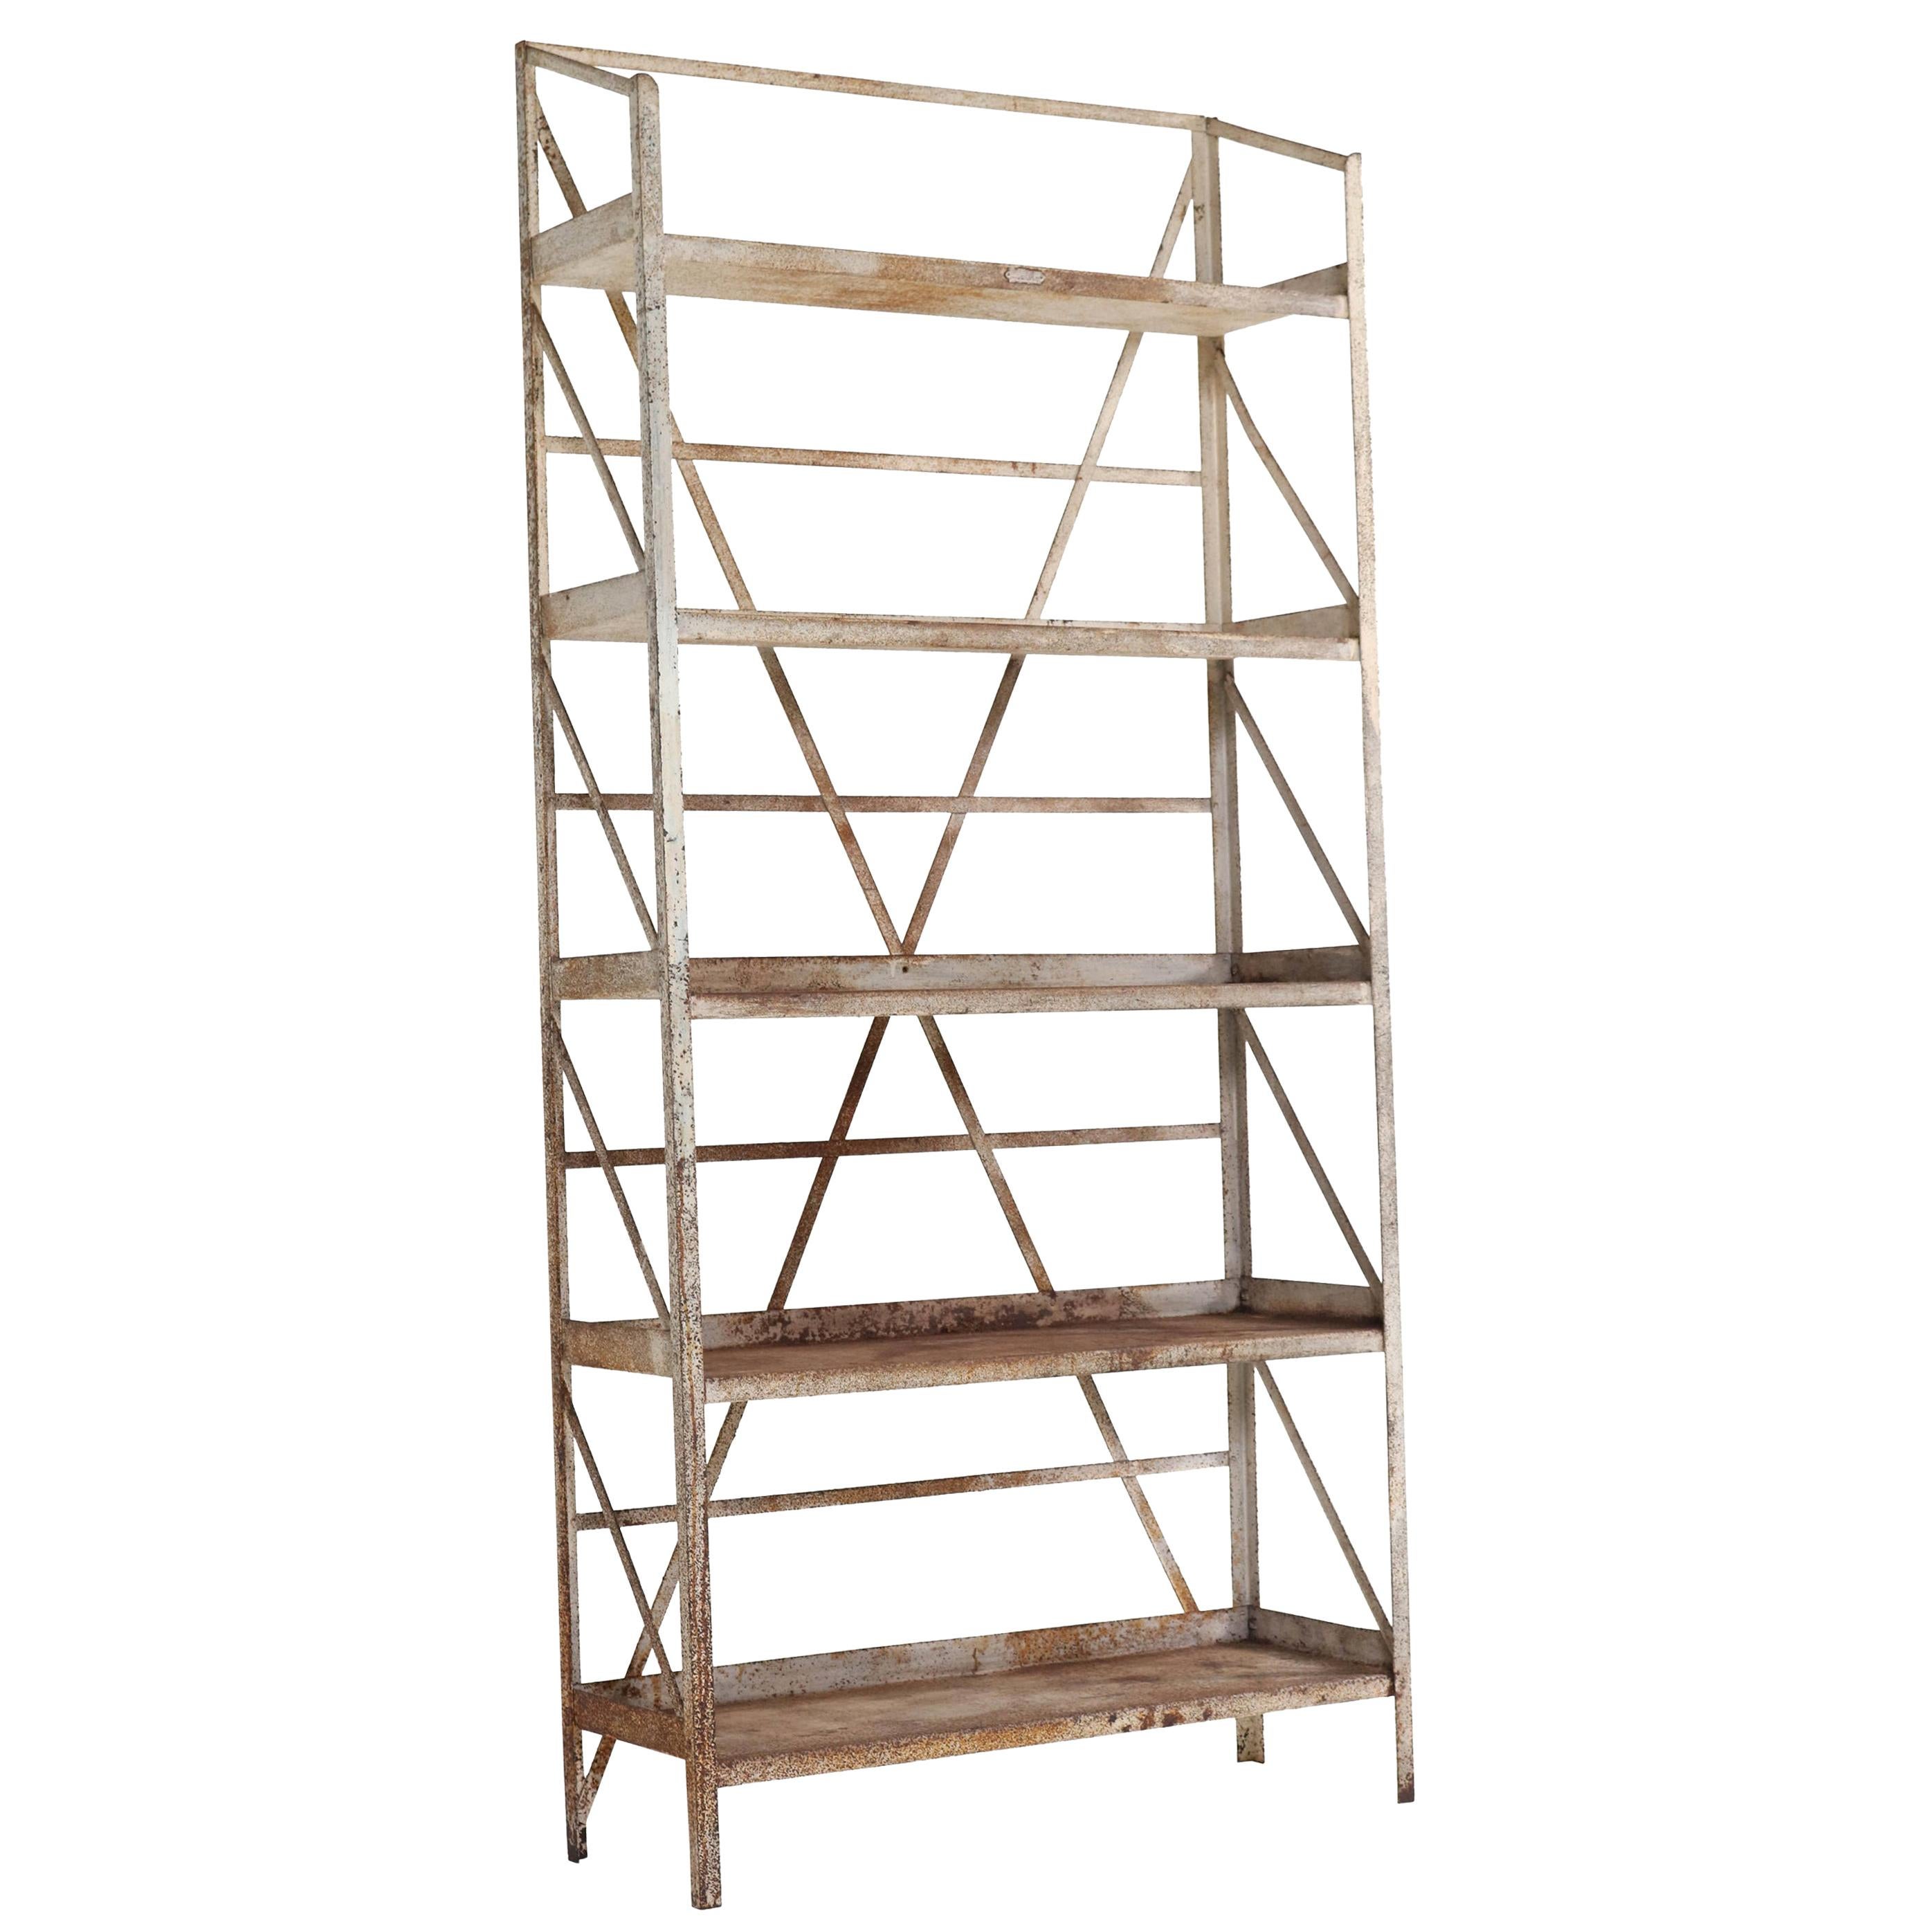 Dutch Industrial Steel Shelving Unit By, Industrial Shelving Units